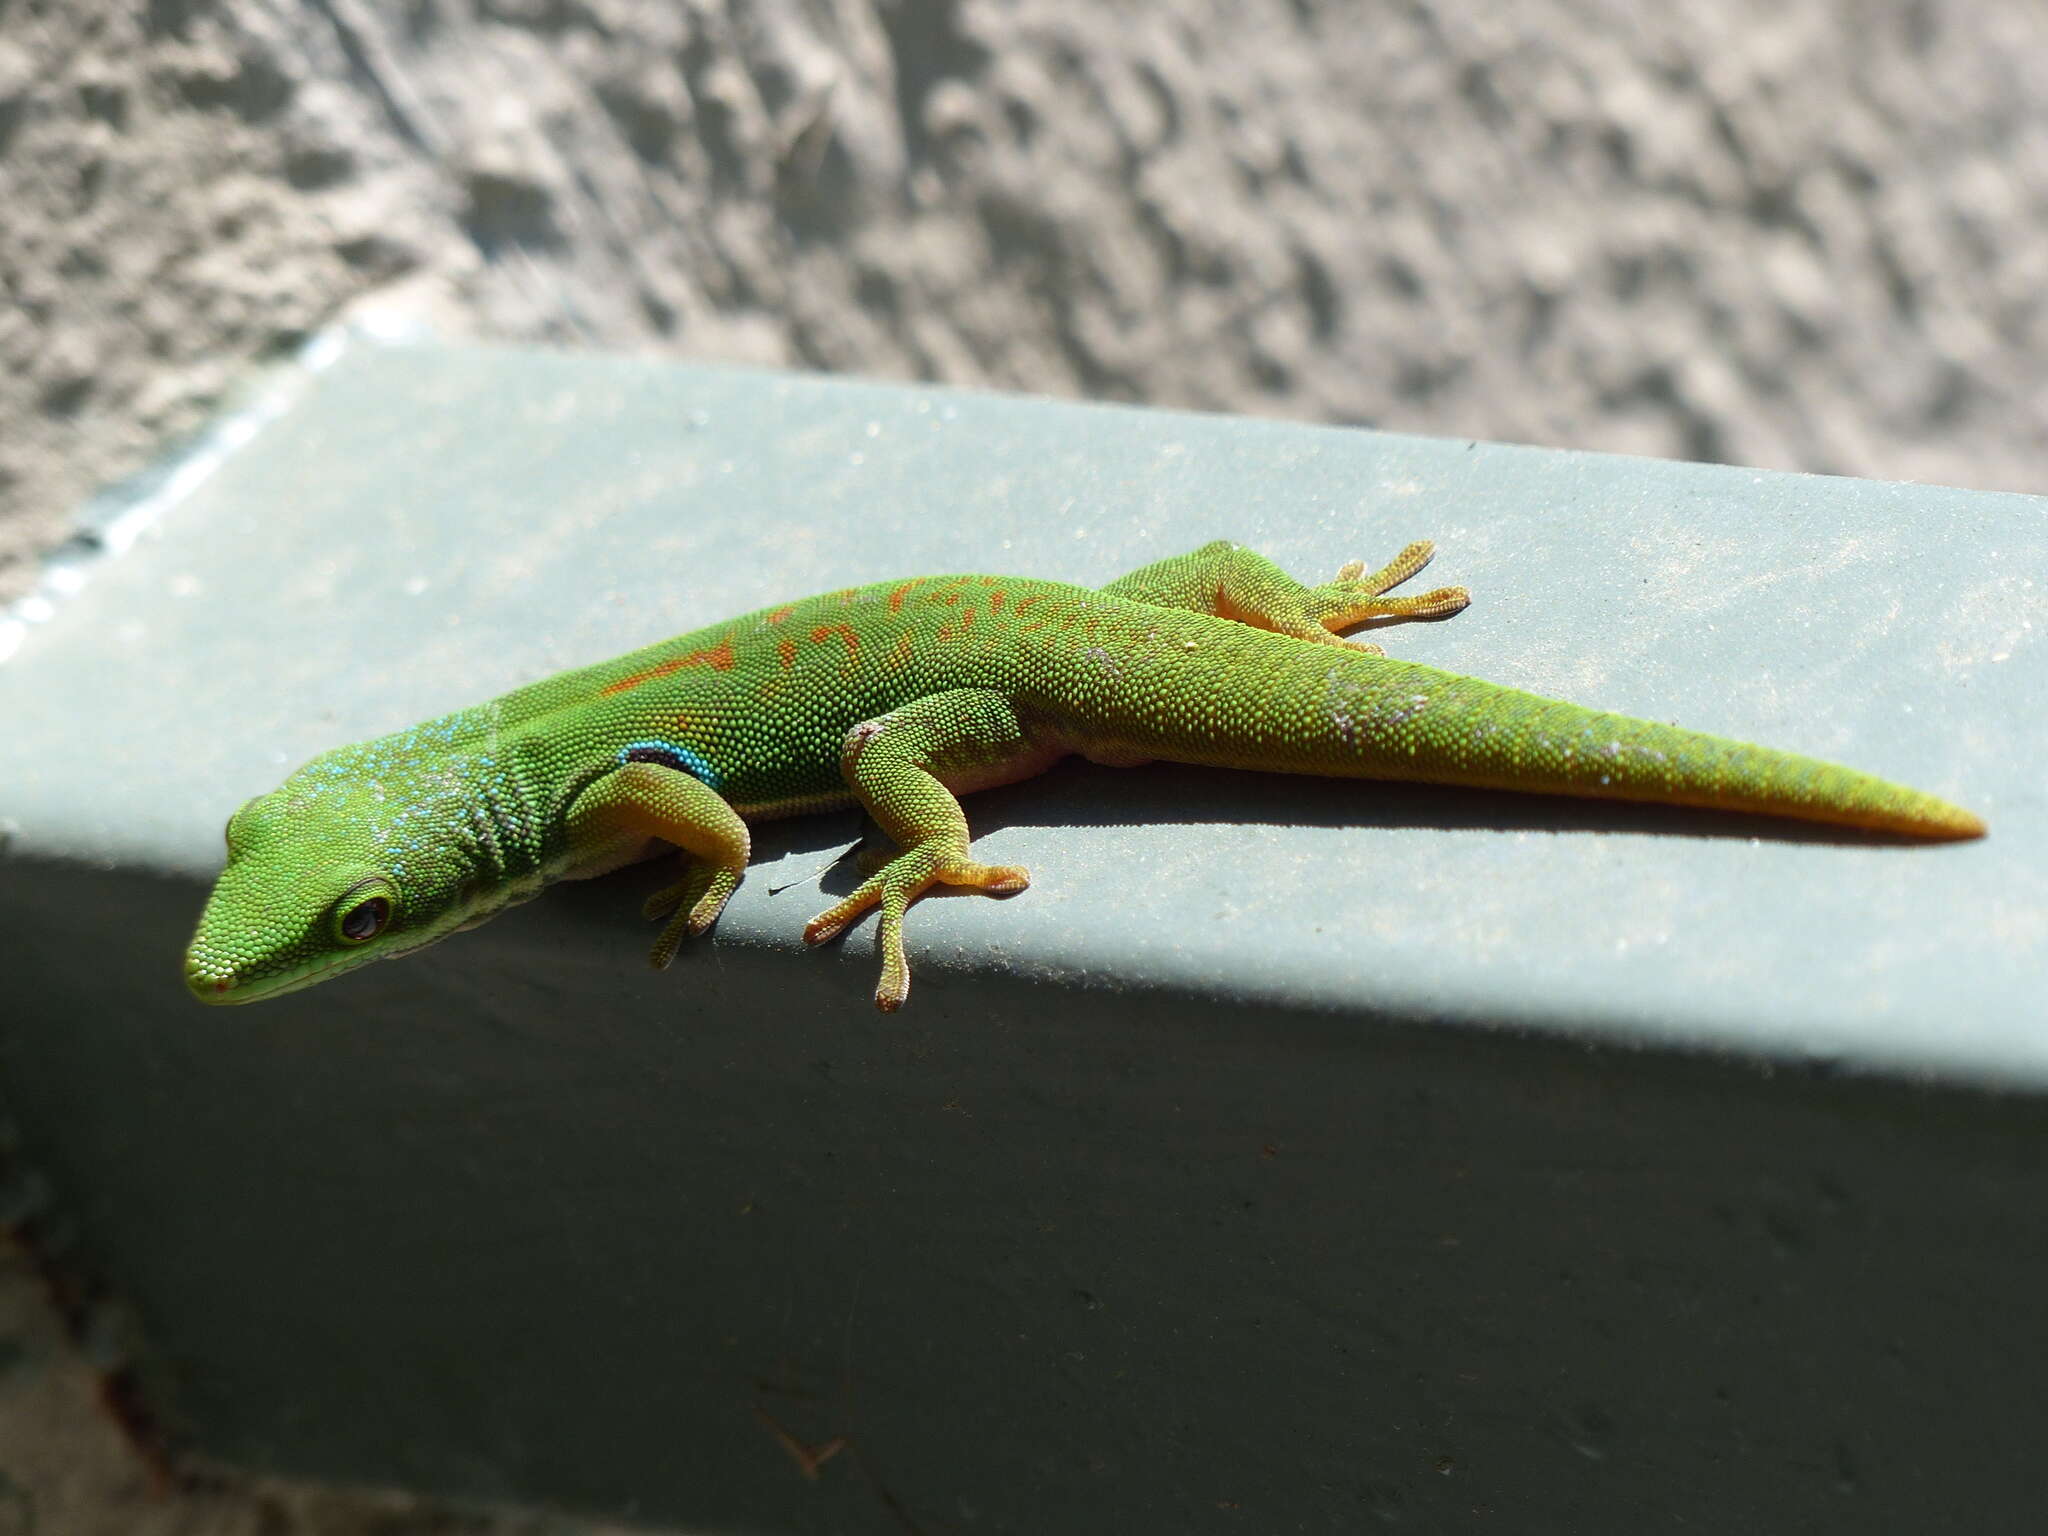 Image of Peacock Day Gecko